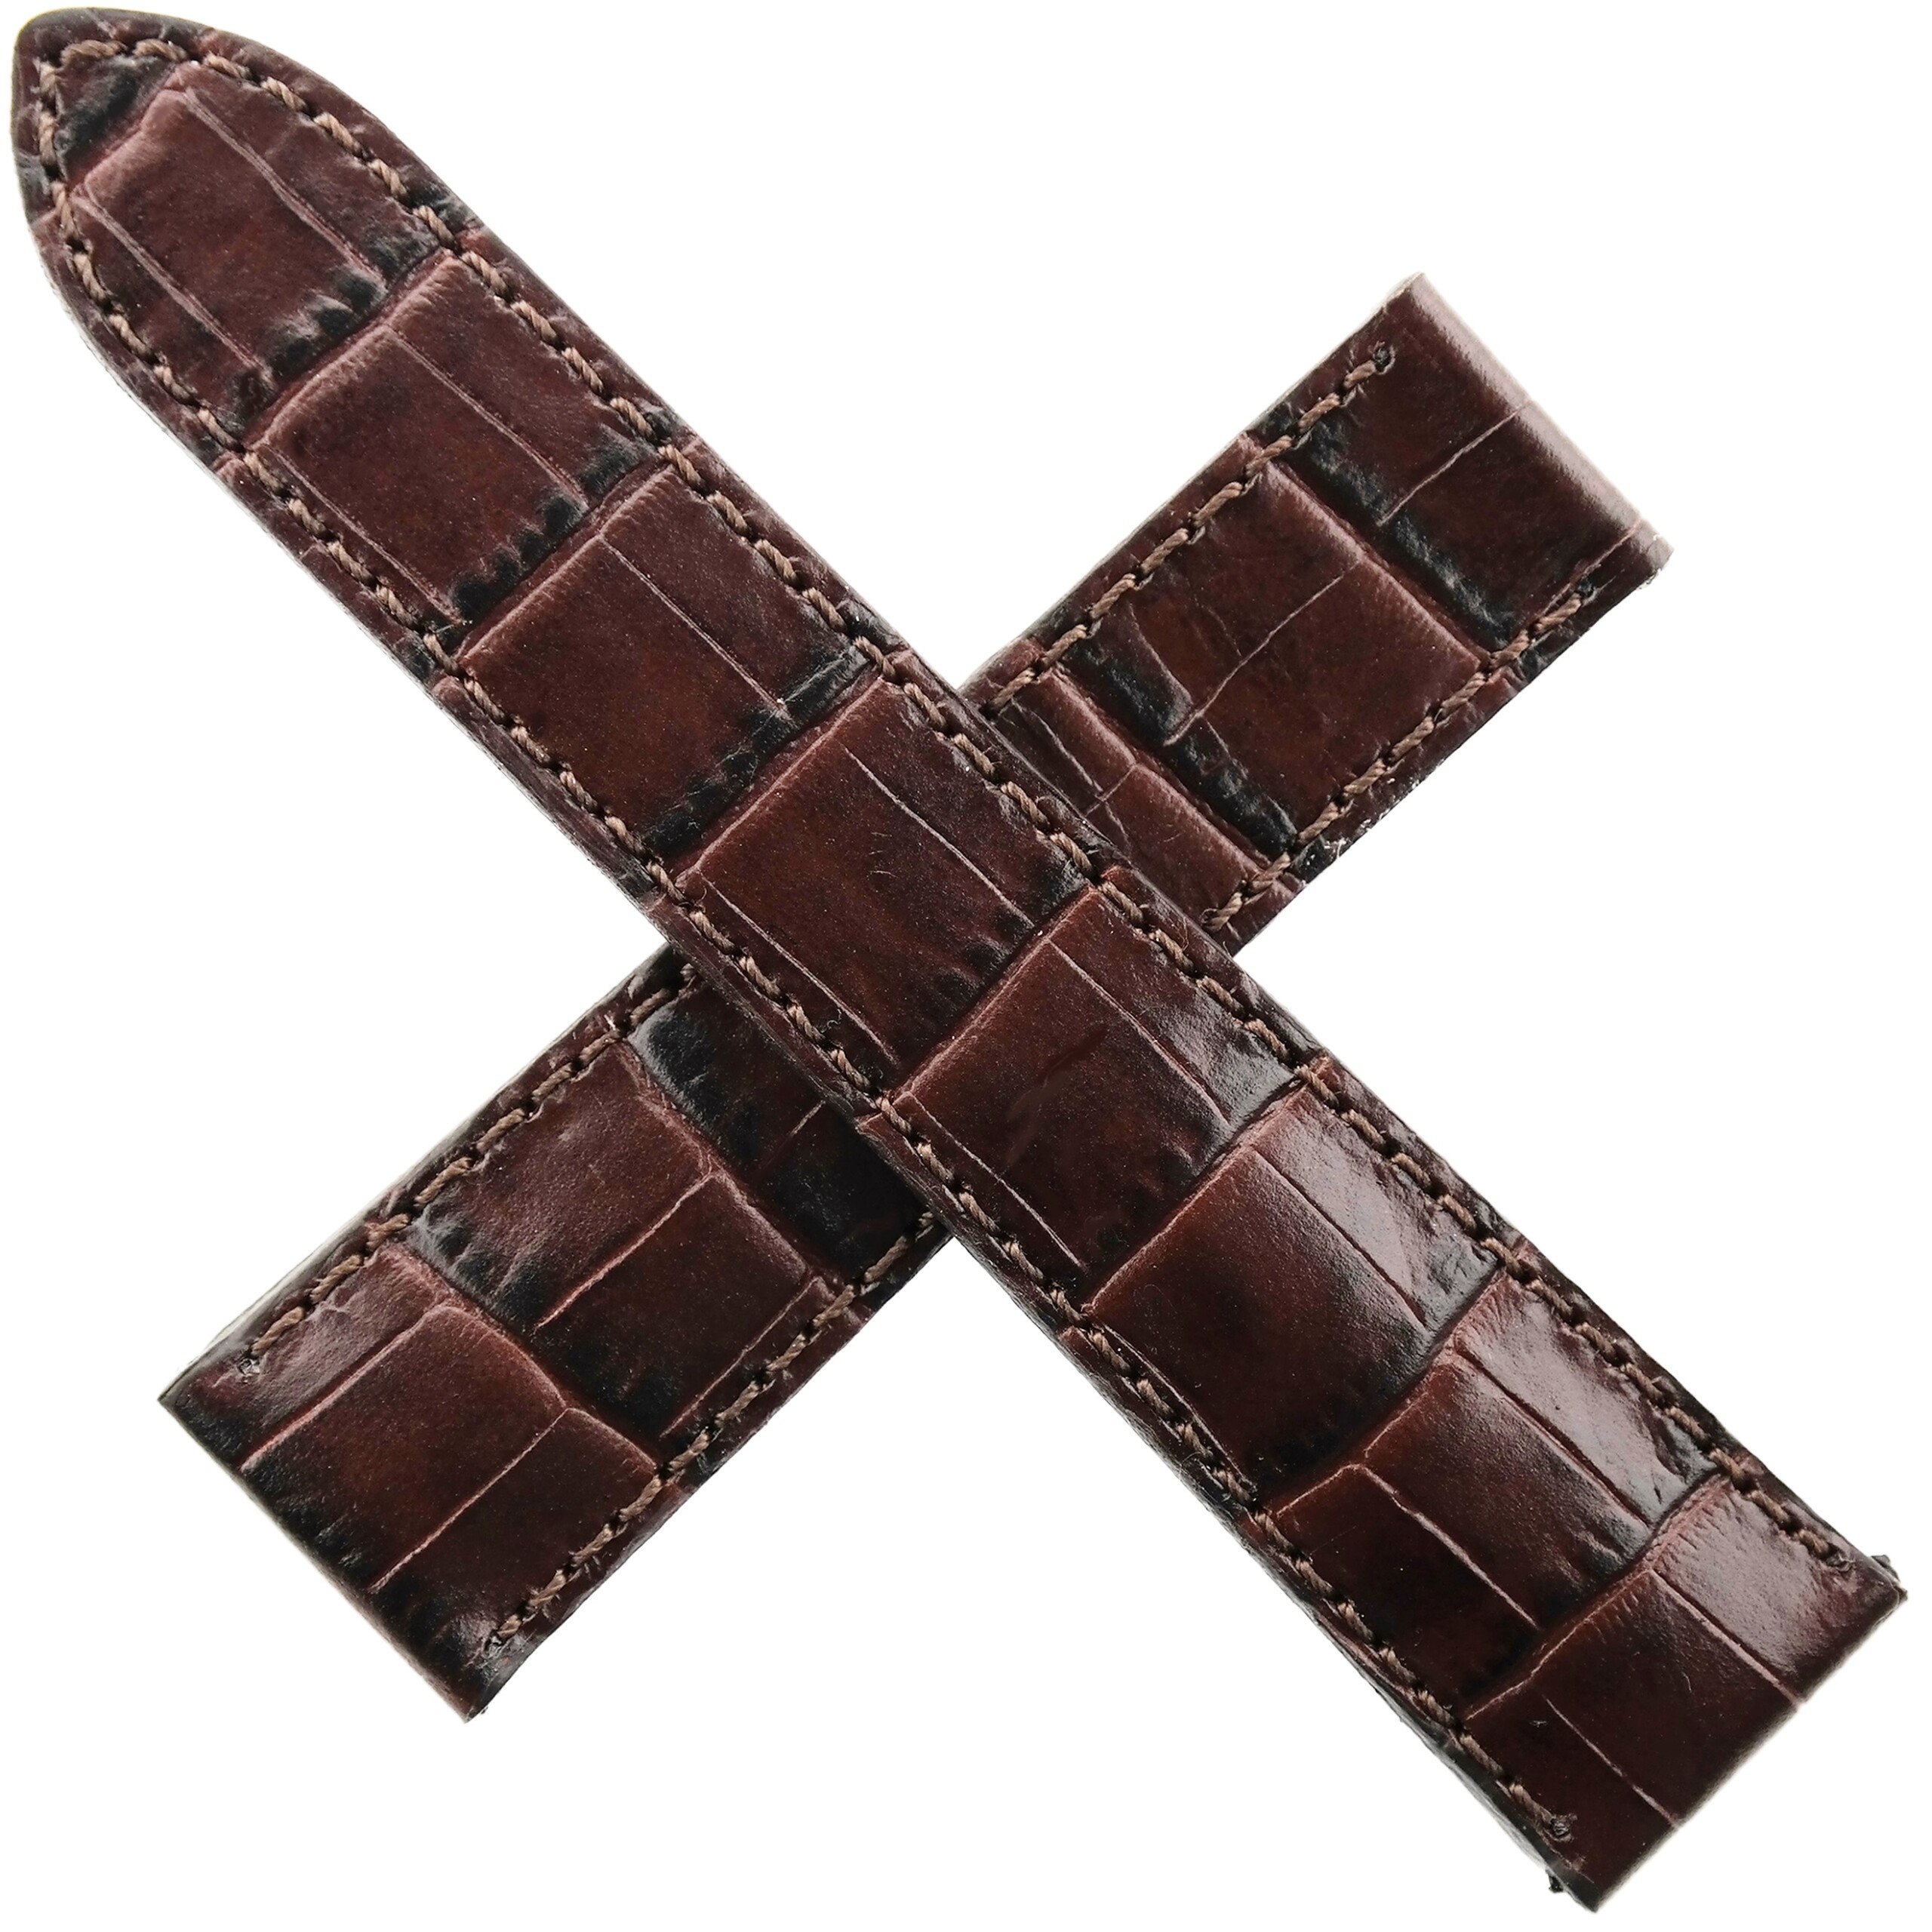 MAURICE LACROIX - Luxury Watch Strap - 21/18 80/115 - Swiss Made - Brown